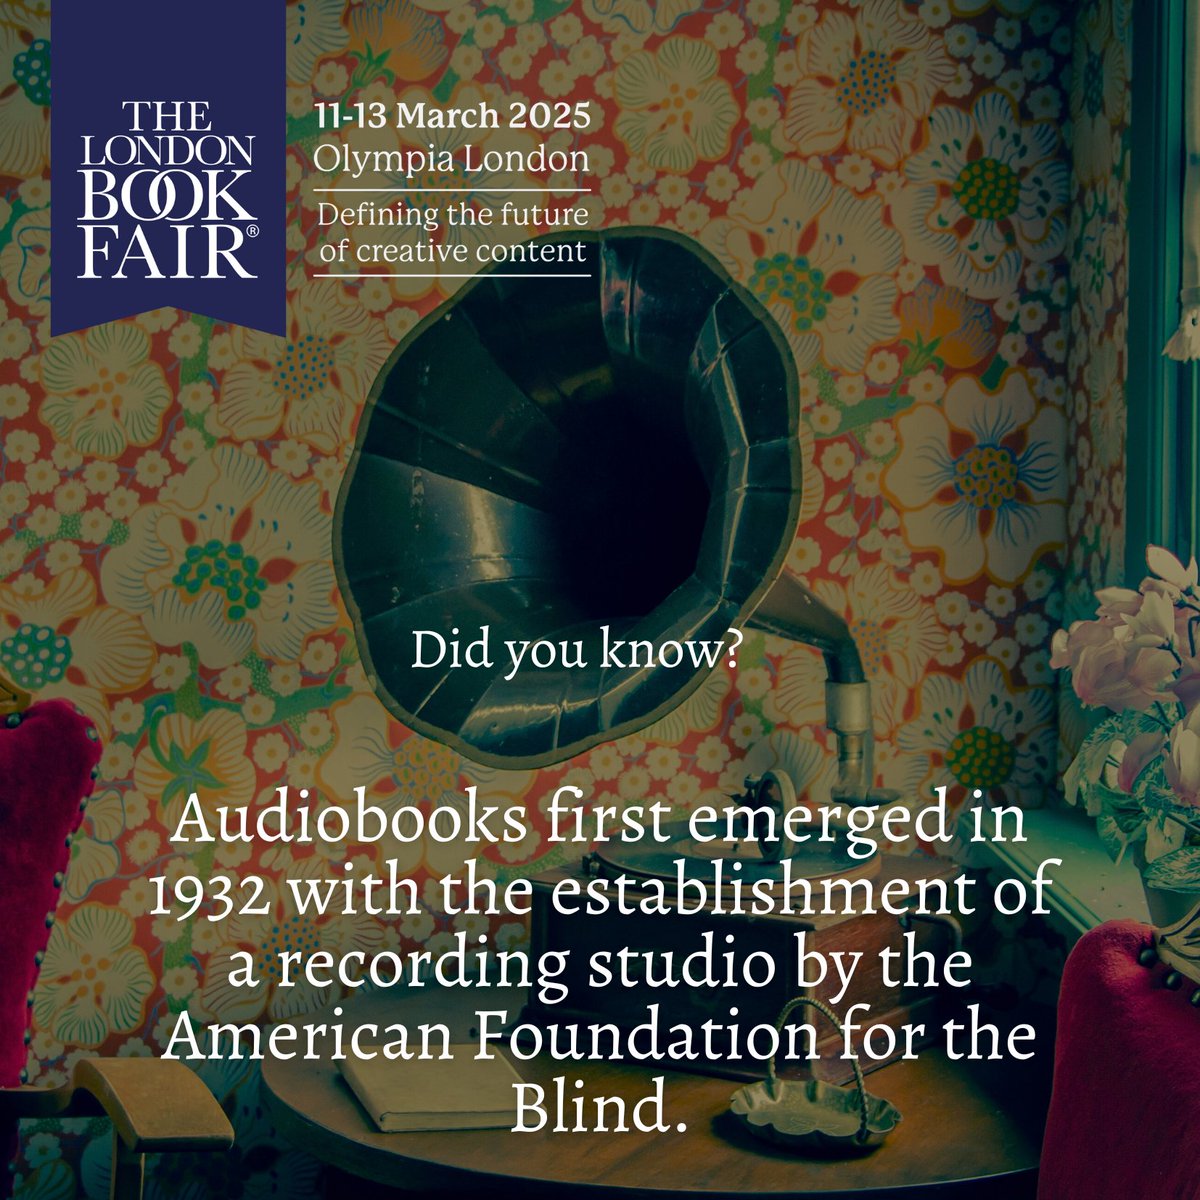 We're continuing our 'did you know' series, and we were fascinated to find out that Audiobooks first emerged way back in 1932!🎧Do you have a favourite audiobook you've listened to recently? Let us know in the comments👇